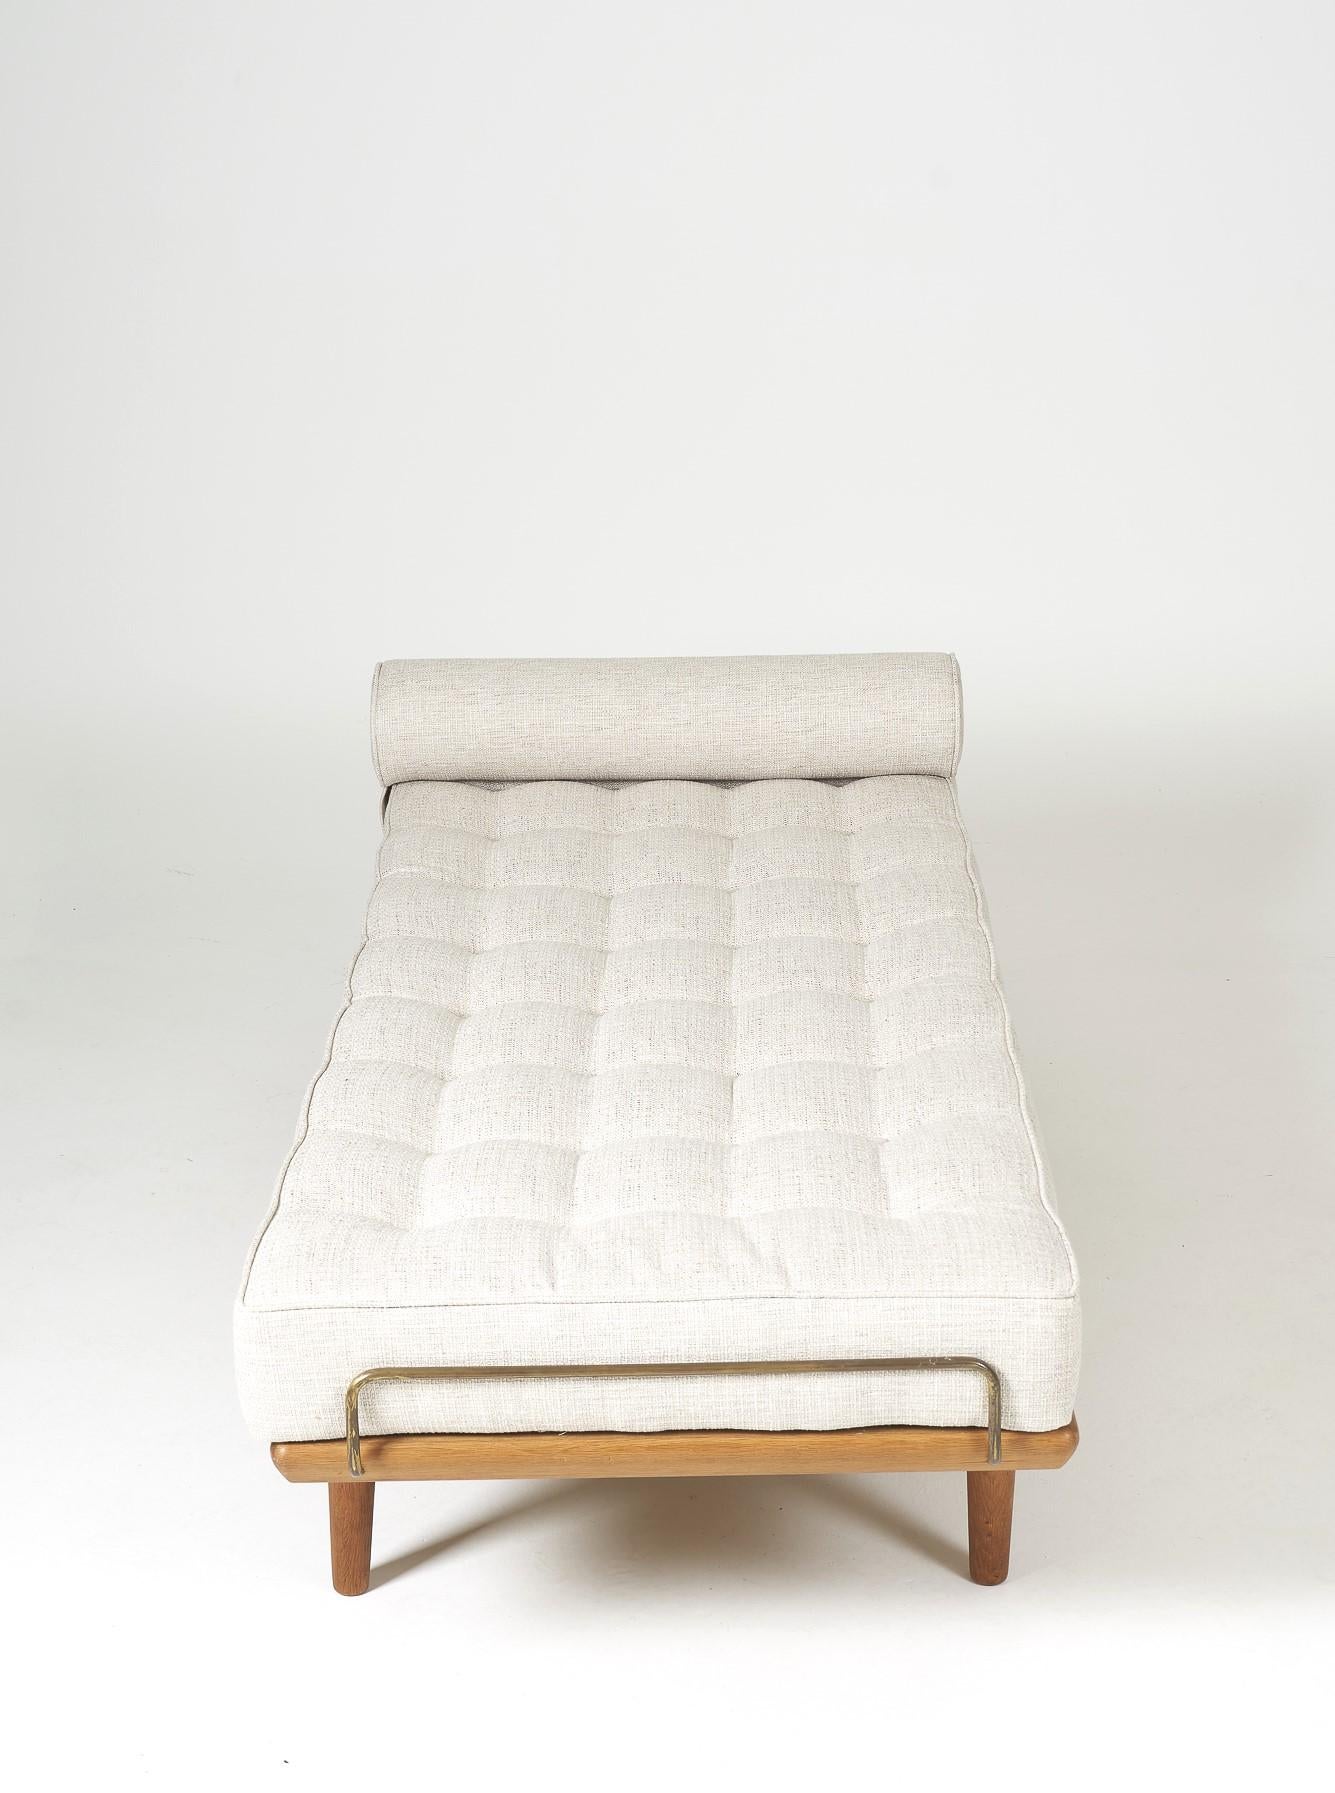 Day Bed model GE19 by the Danish designer Hans J.Wegner published by Gemata, in 1956. Solid teak structure, tapered legs and brass mattress support. Mattress and bolster entirely upholstered in high quality fabric.